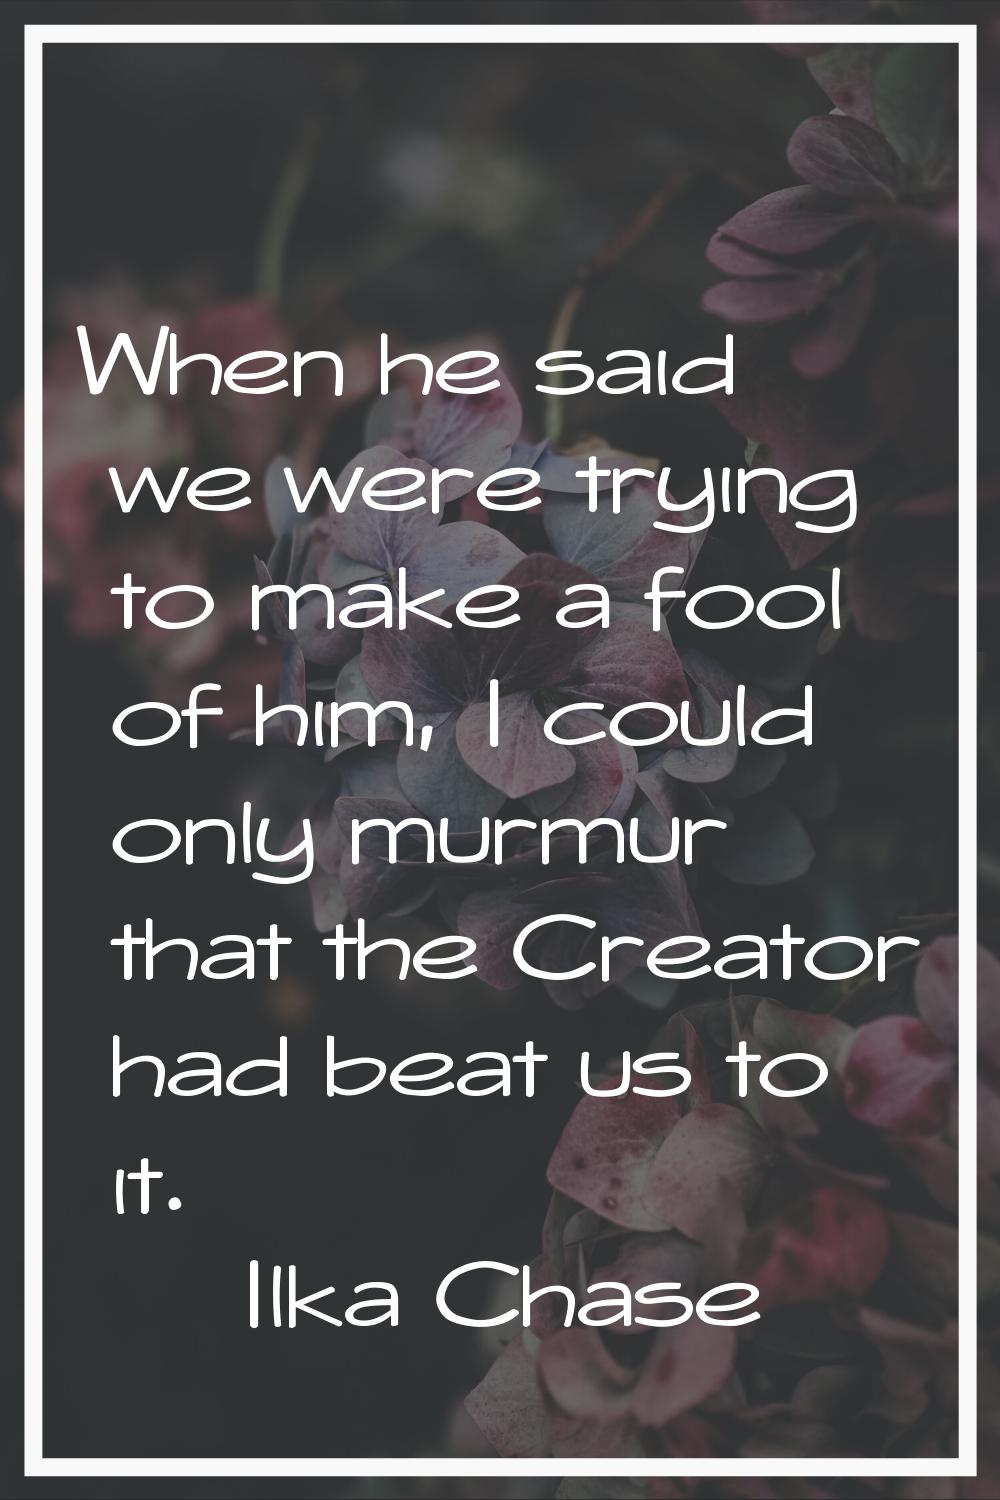 When he said we were trying to make a fool of him, I could only murmur that the Creator had beat us